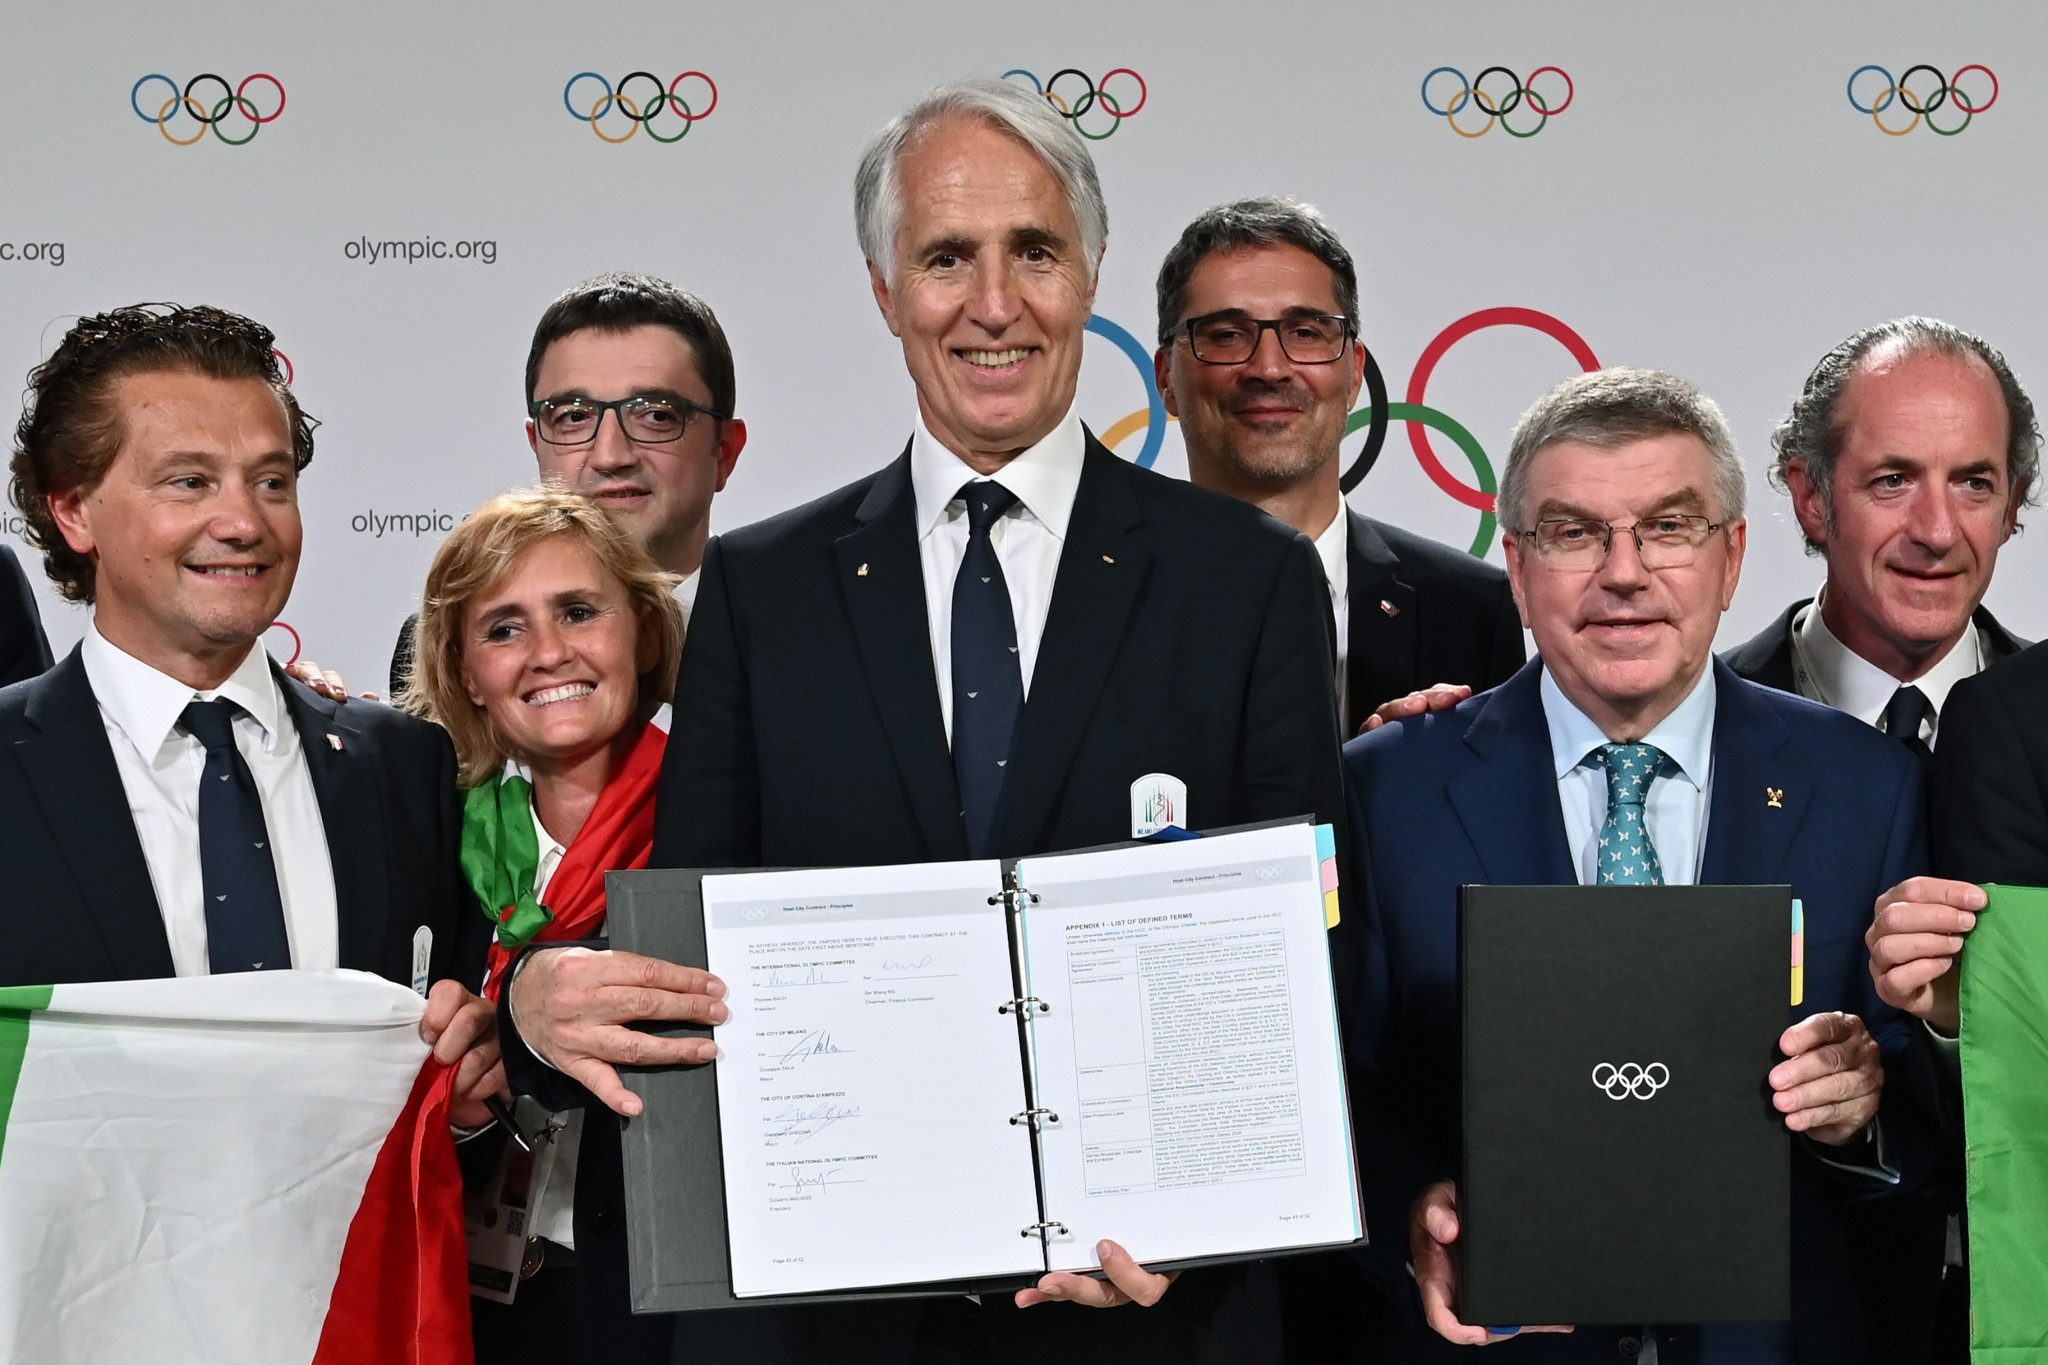 Giovanni Malagò highlighted the crucial role played by politicians last year when the Milan Cortina 2026 bid appeared at risk following the withdrawal of Turin from the project ©Getty Images